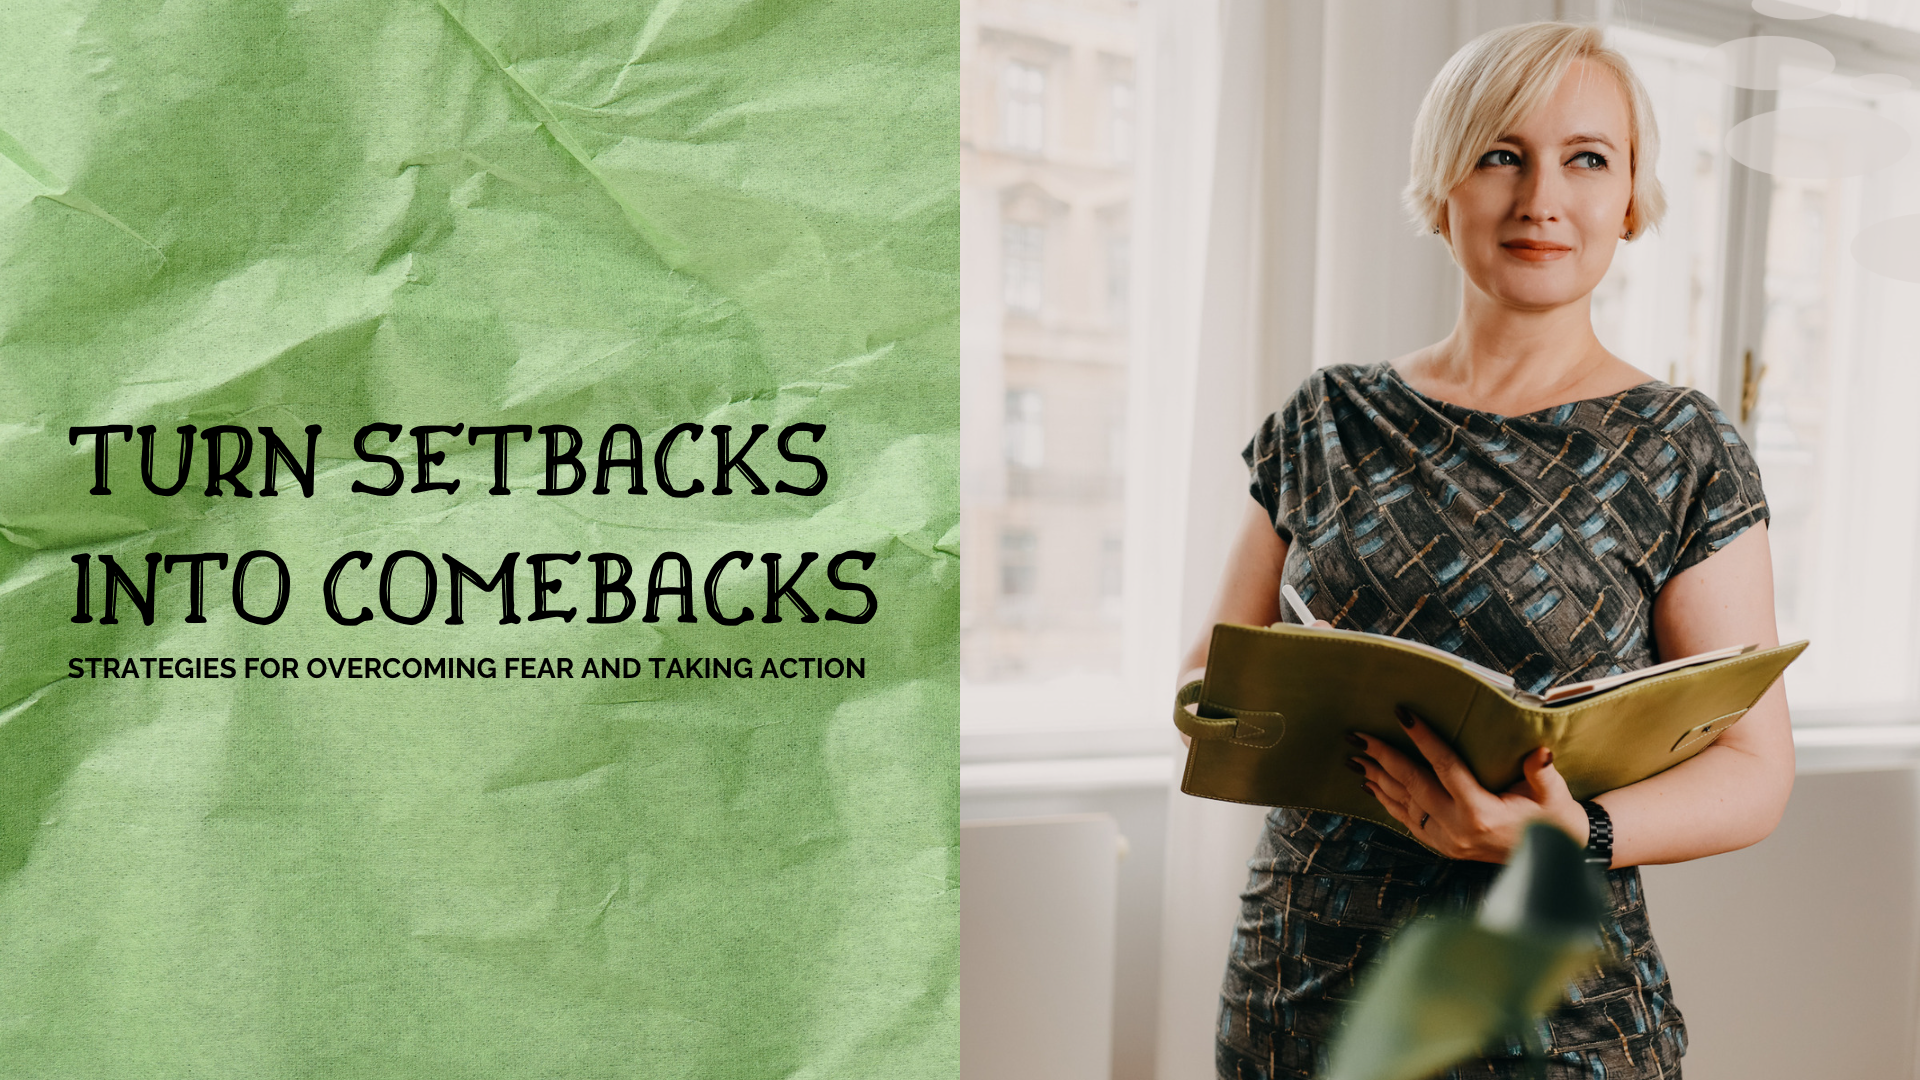 Turn setbacks into comebacks: strategies for overcoming fear and taking action